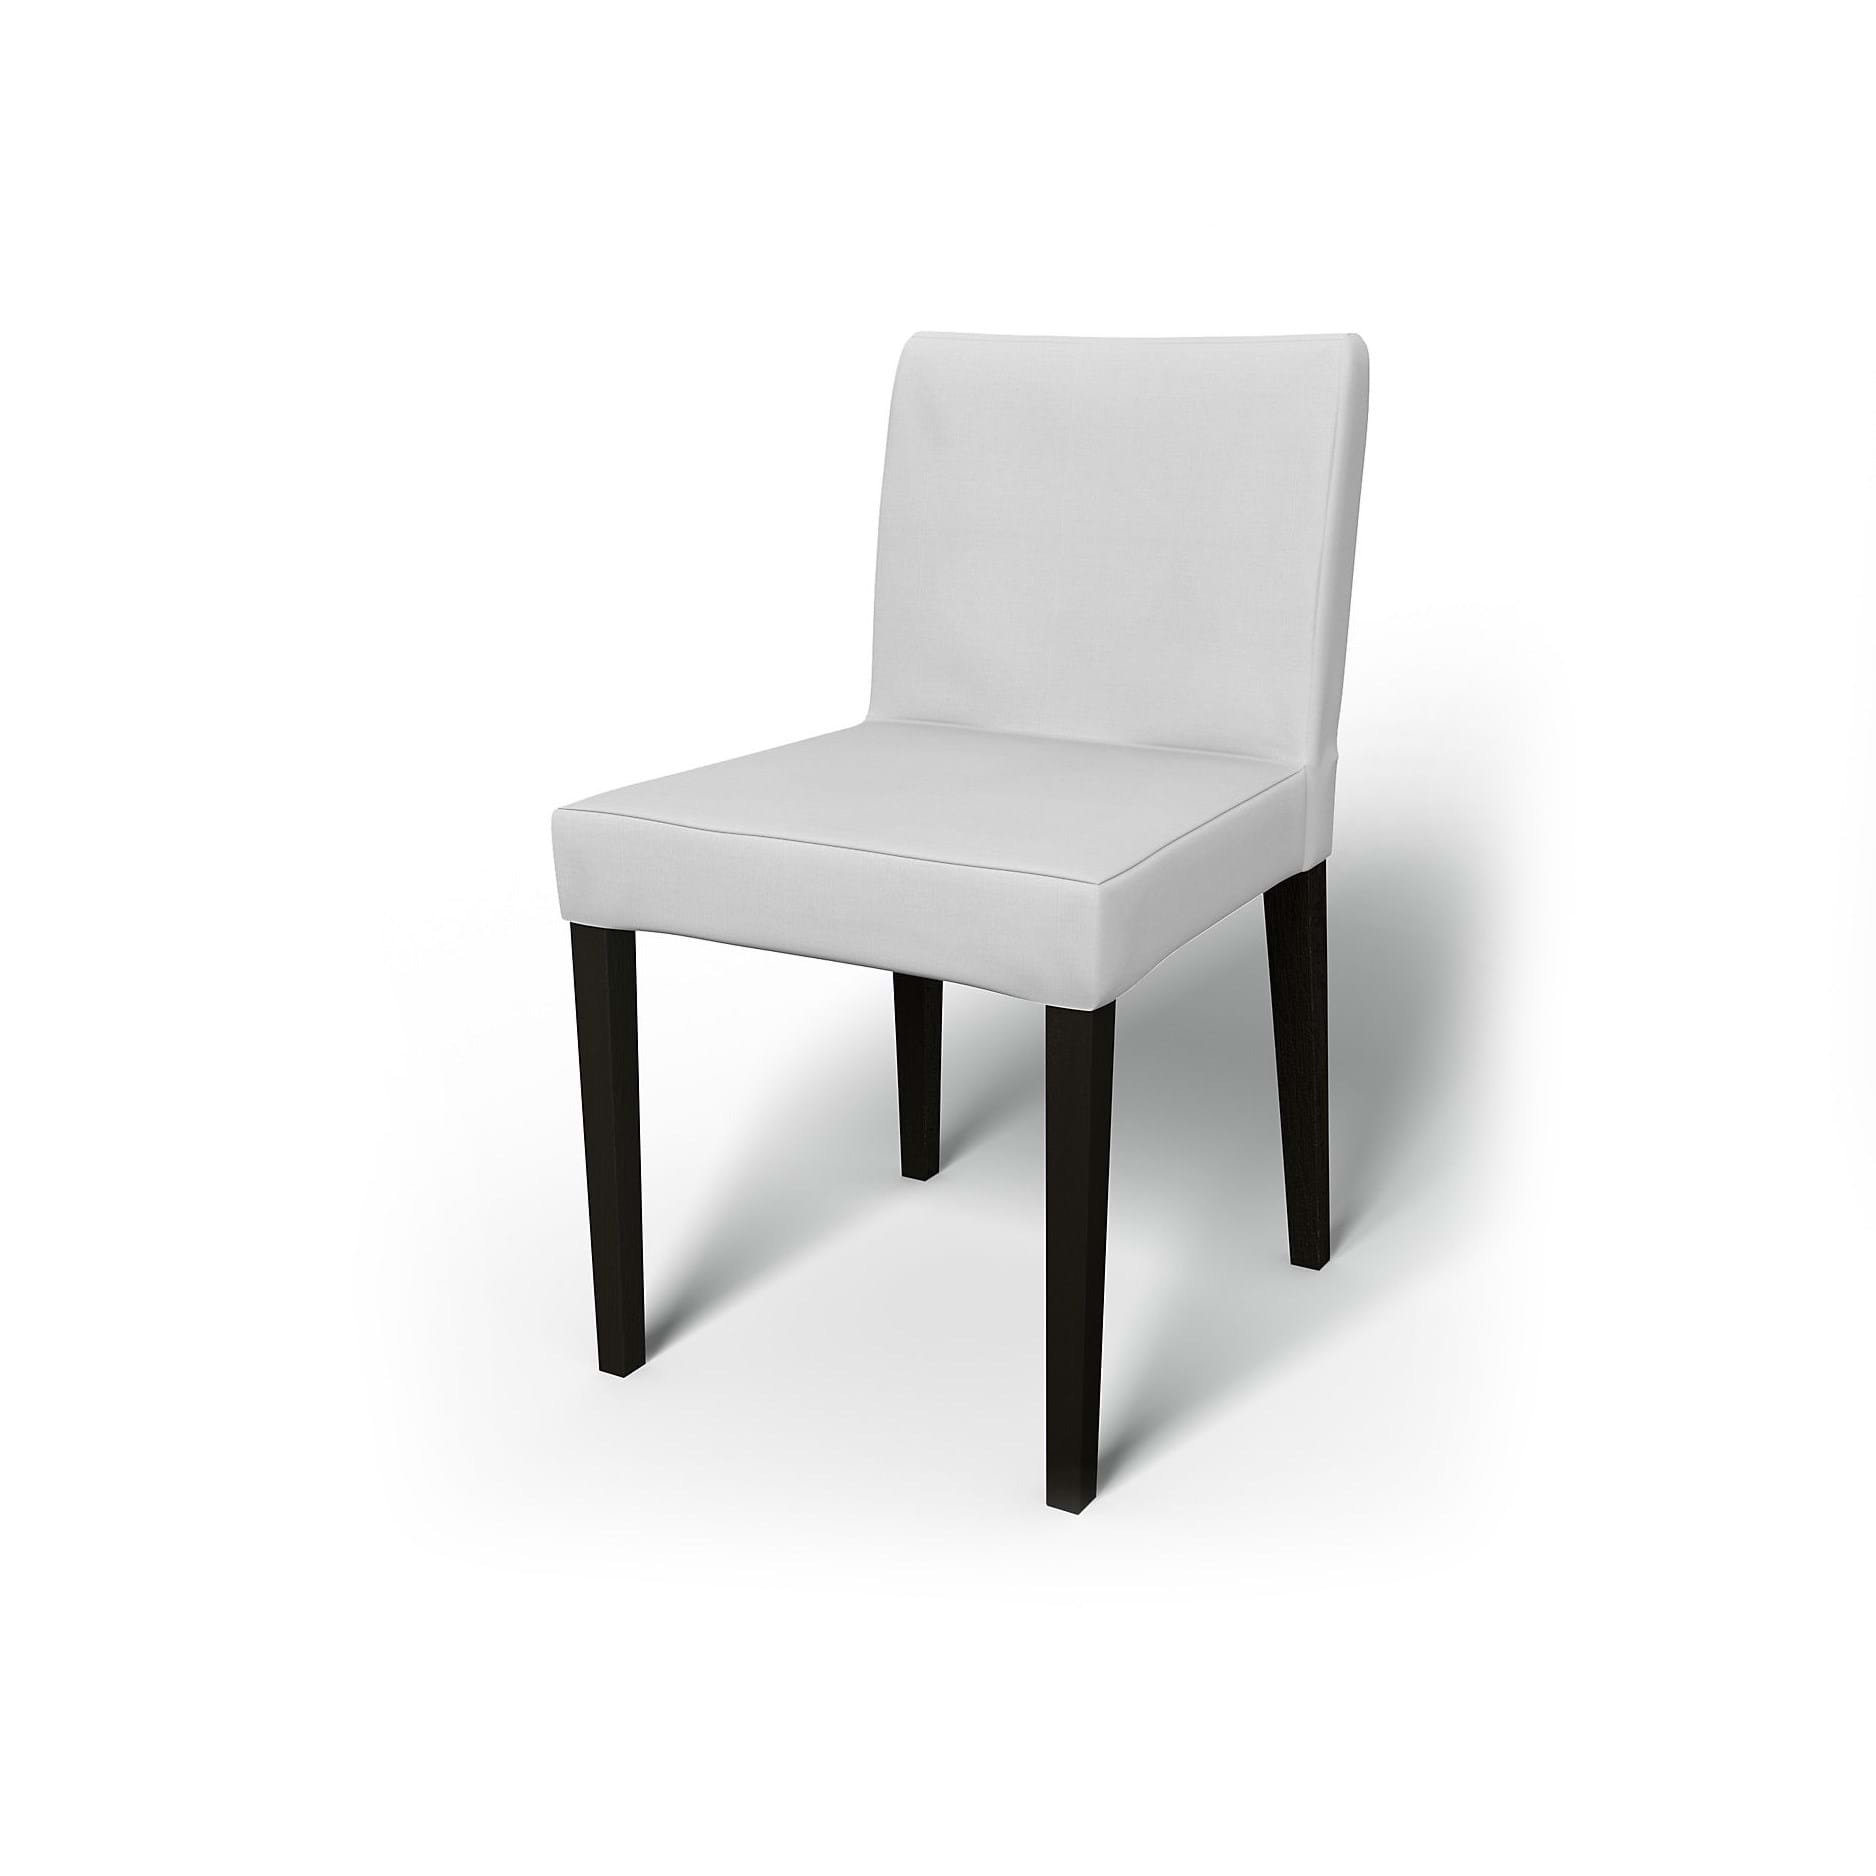 Ikea Ektorp Armchair Cover With Piping Bemz Bemz